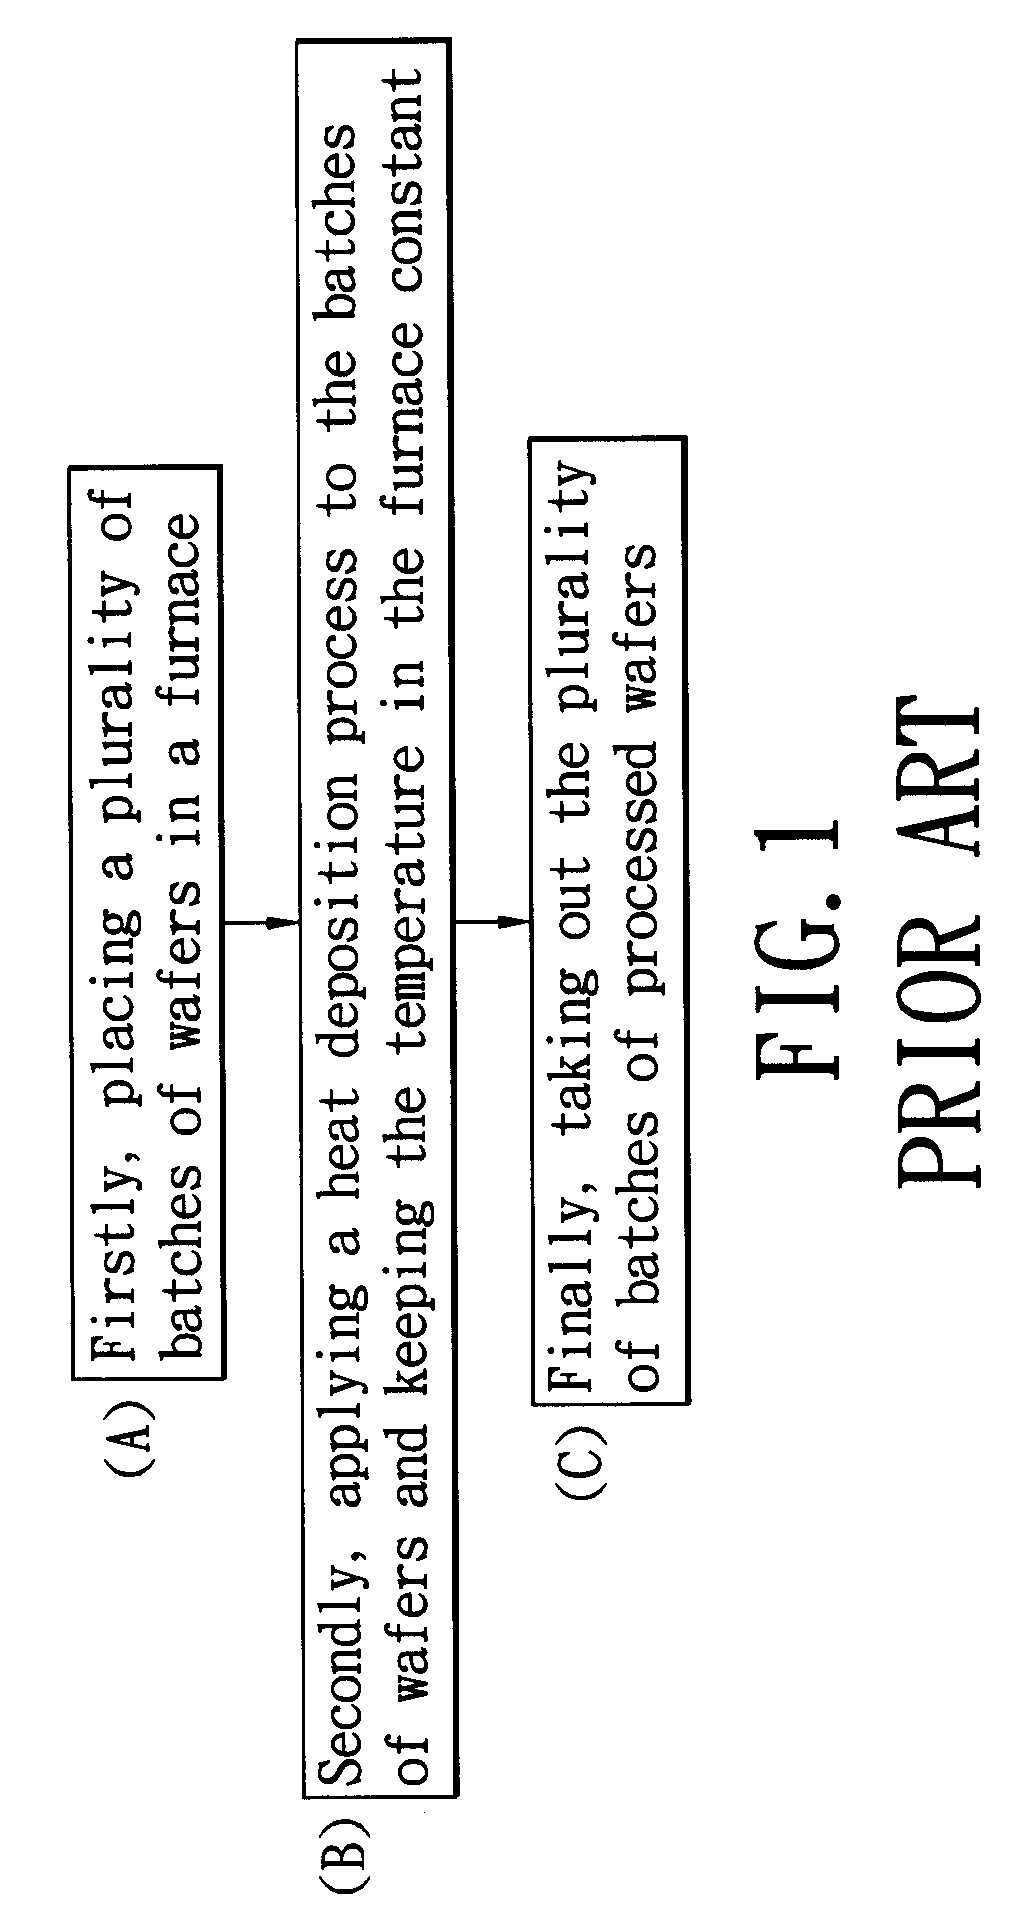 Furnace temperature control method for thermal budget balance